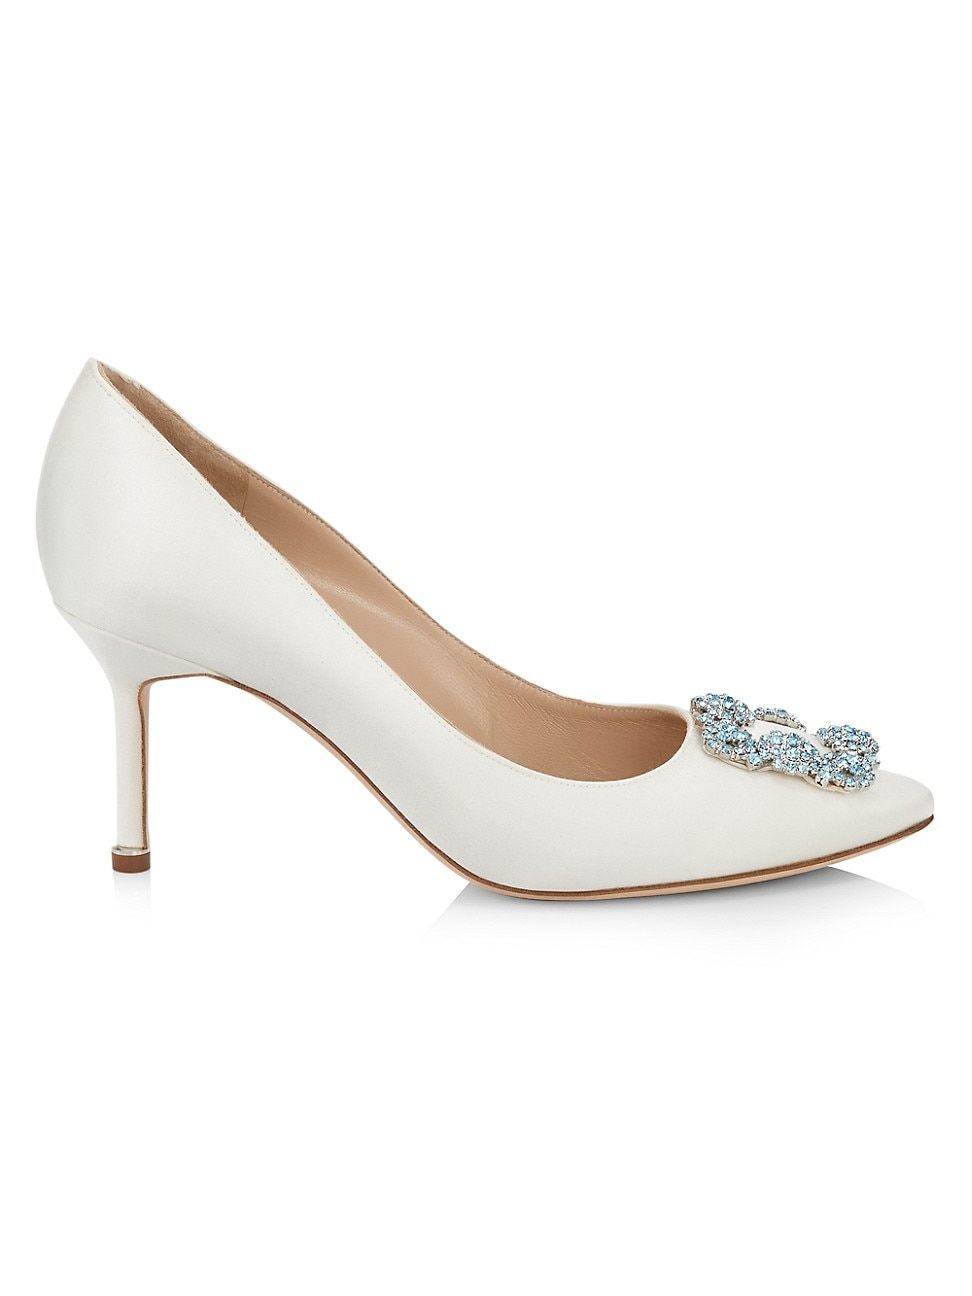 8 Tips For Flawless Wedding Shoe Shopping